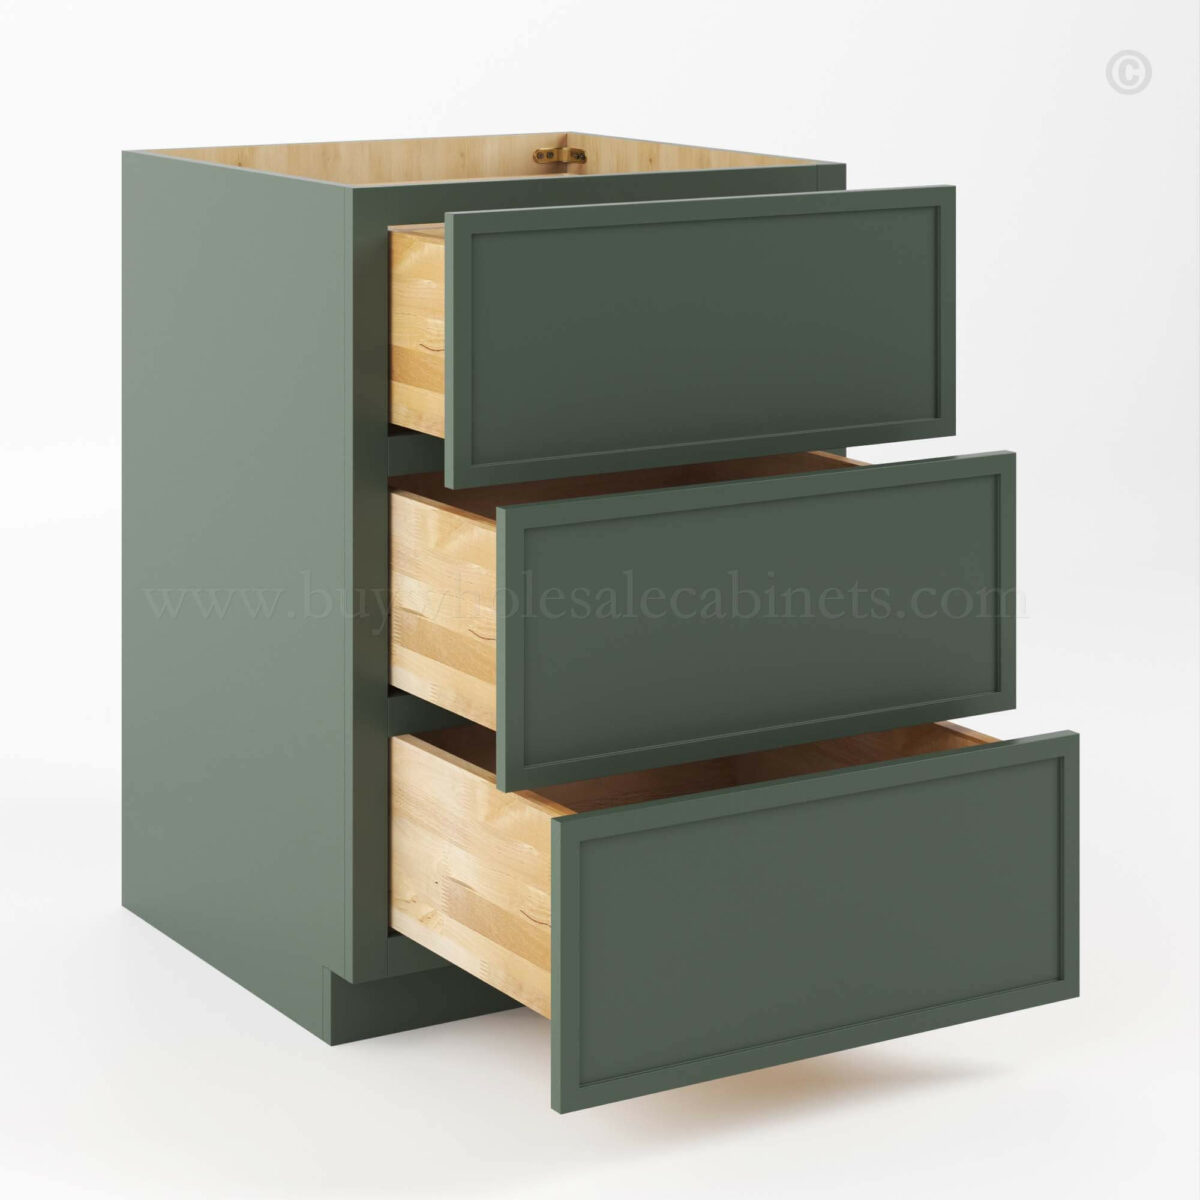 Slim Shaker Green Base Cabinet with 3 Drawers, rta cabinets, wholesale cabinets